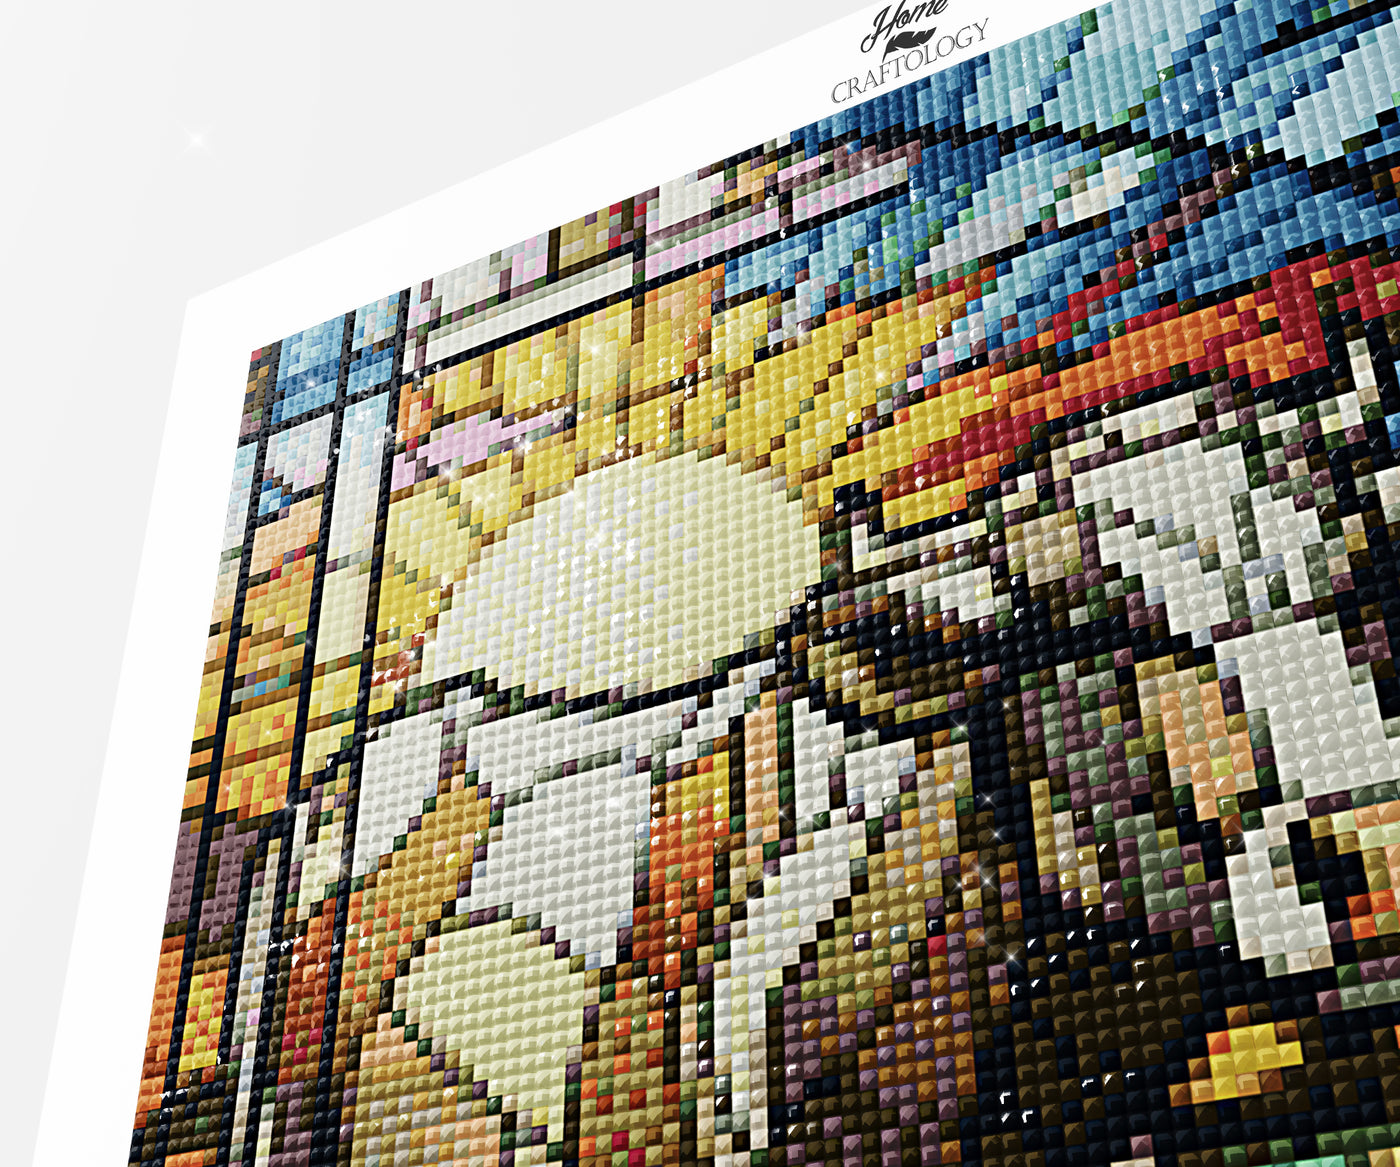 Stained Glass Cow - Premium Diamond Painting Kit